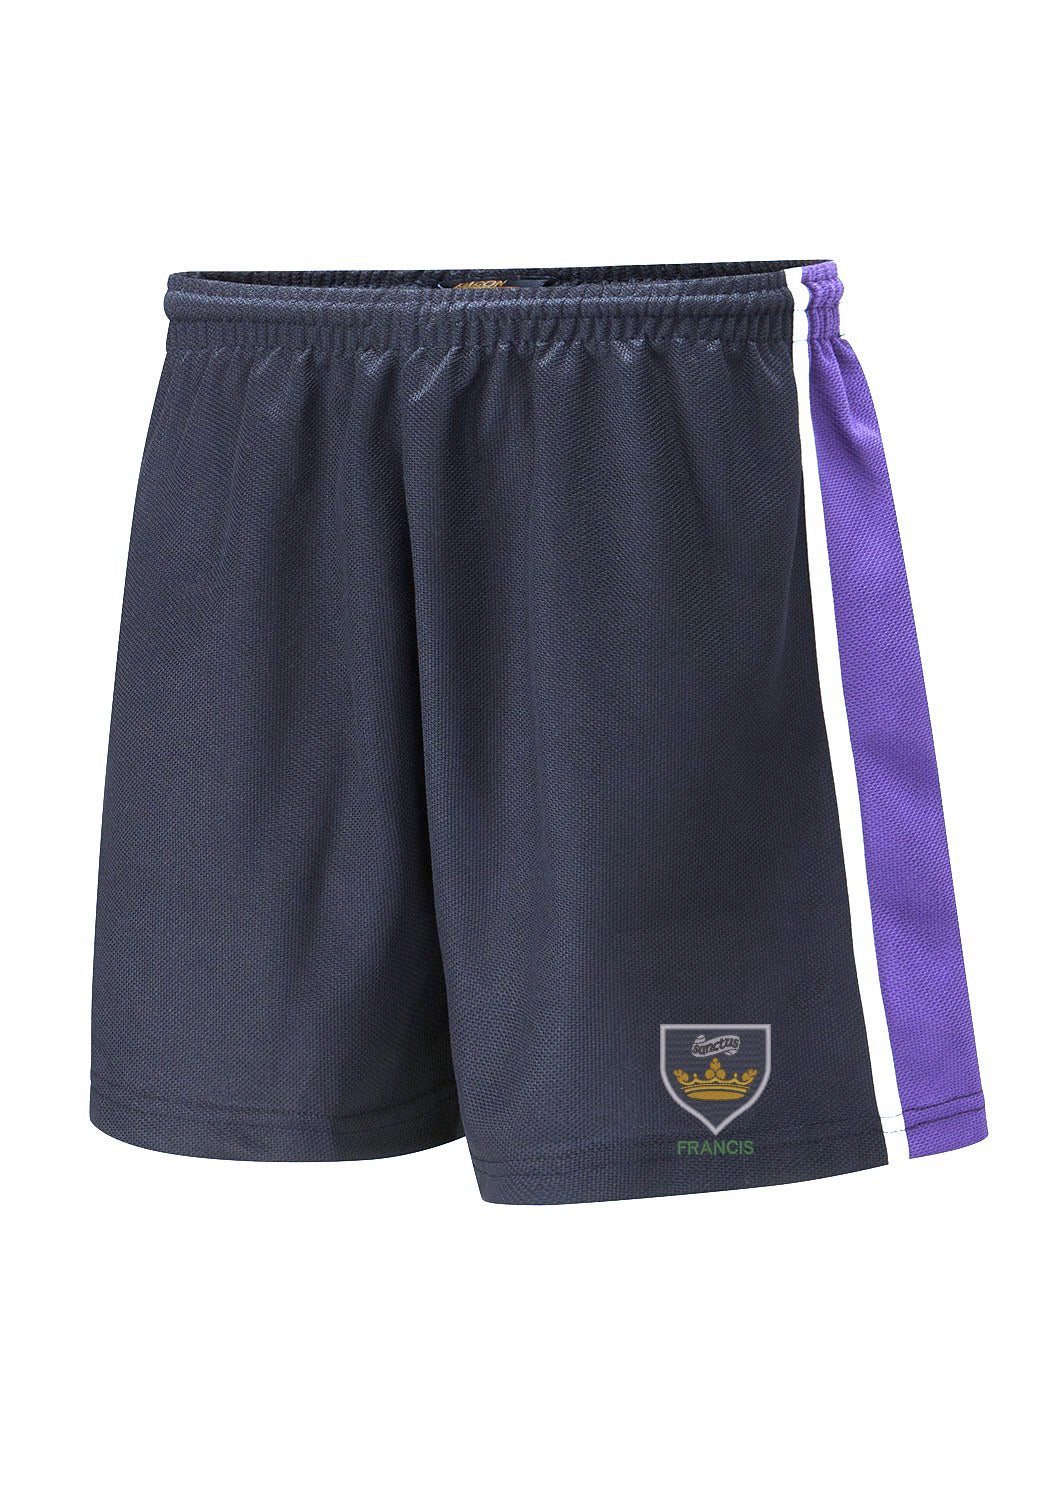 All Saints Navy, Purple And White Sport Shorts House Francis